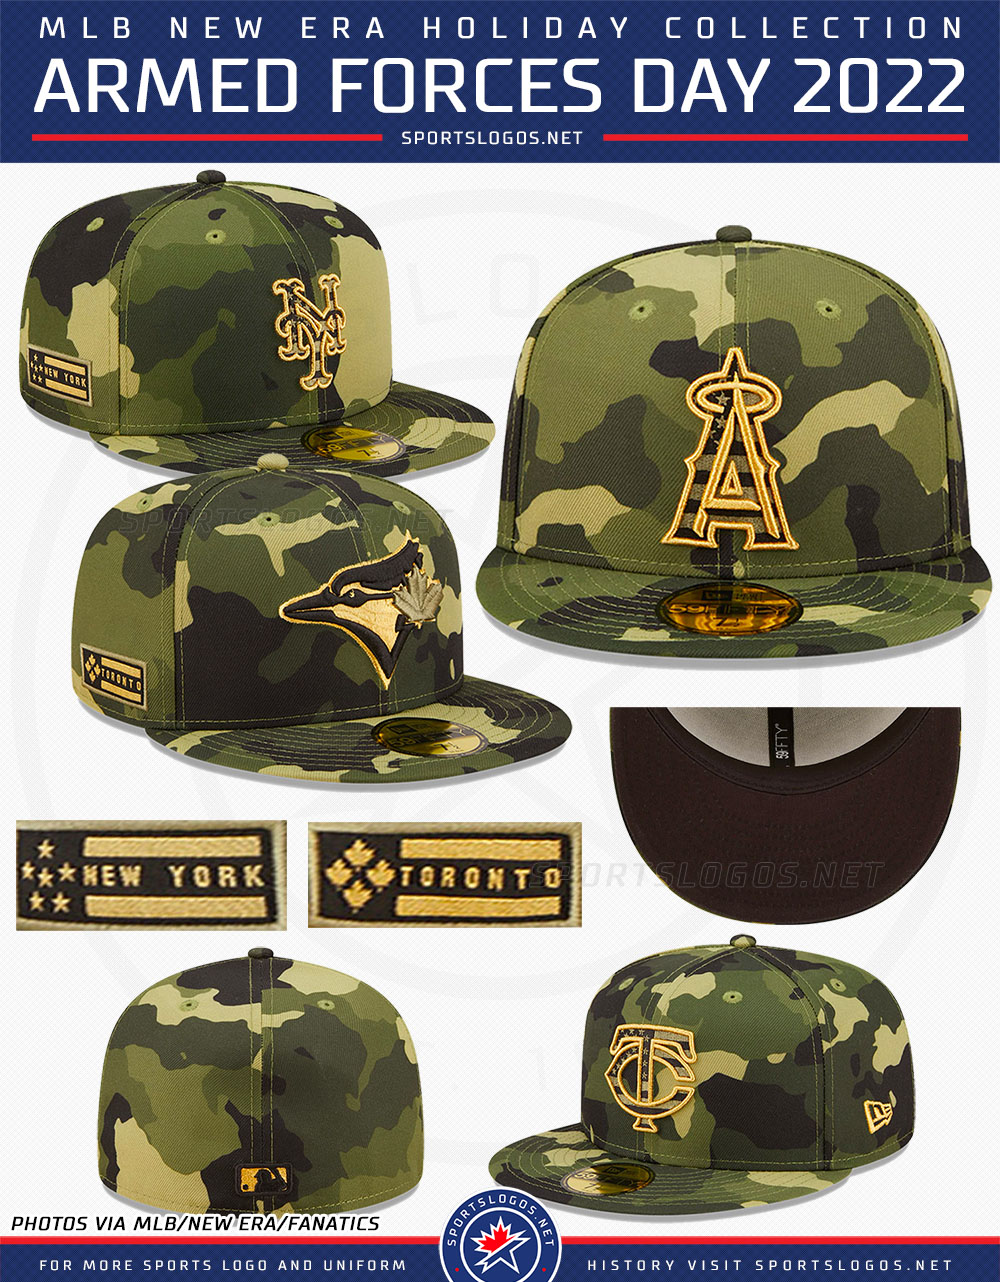 MLB 2022 Camouflage Caps for Armed Forces Day News